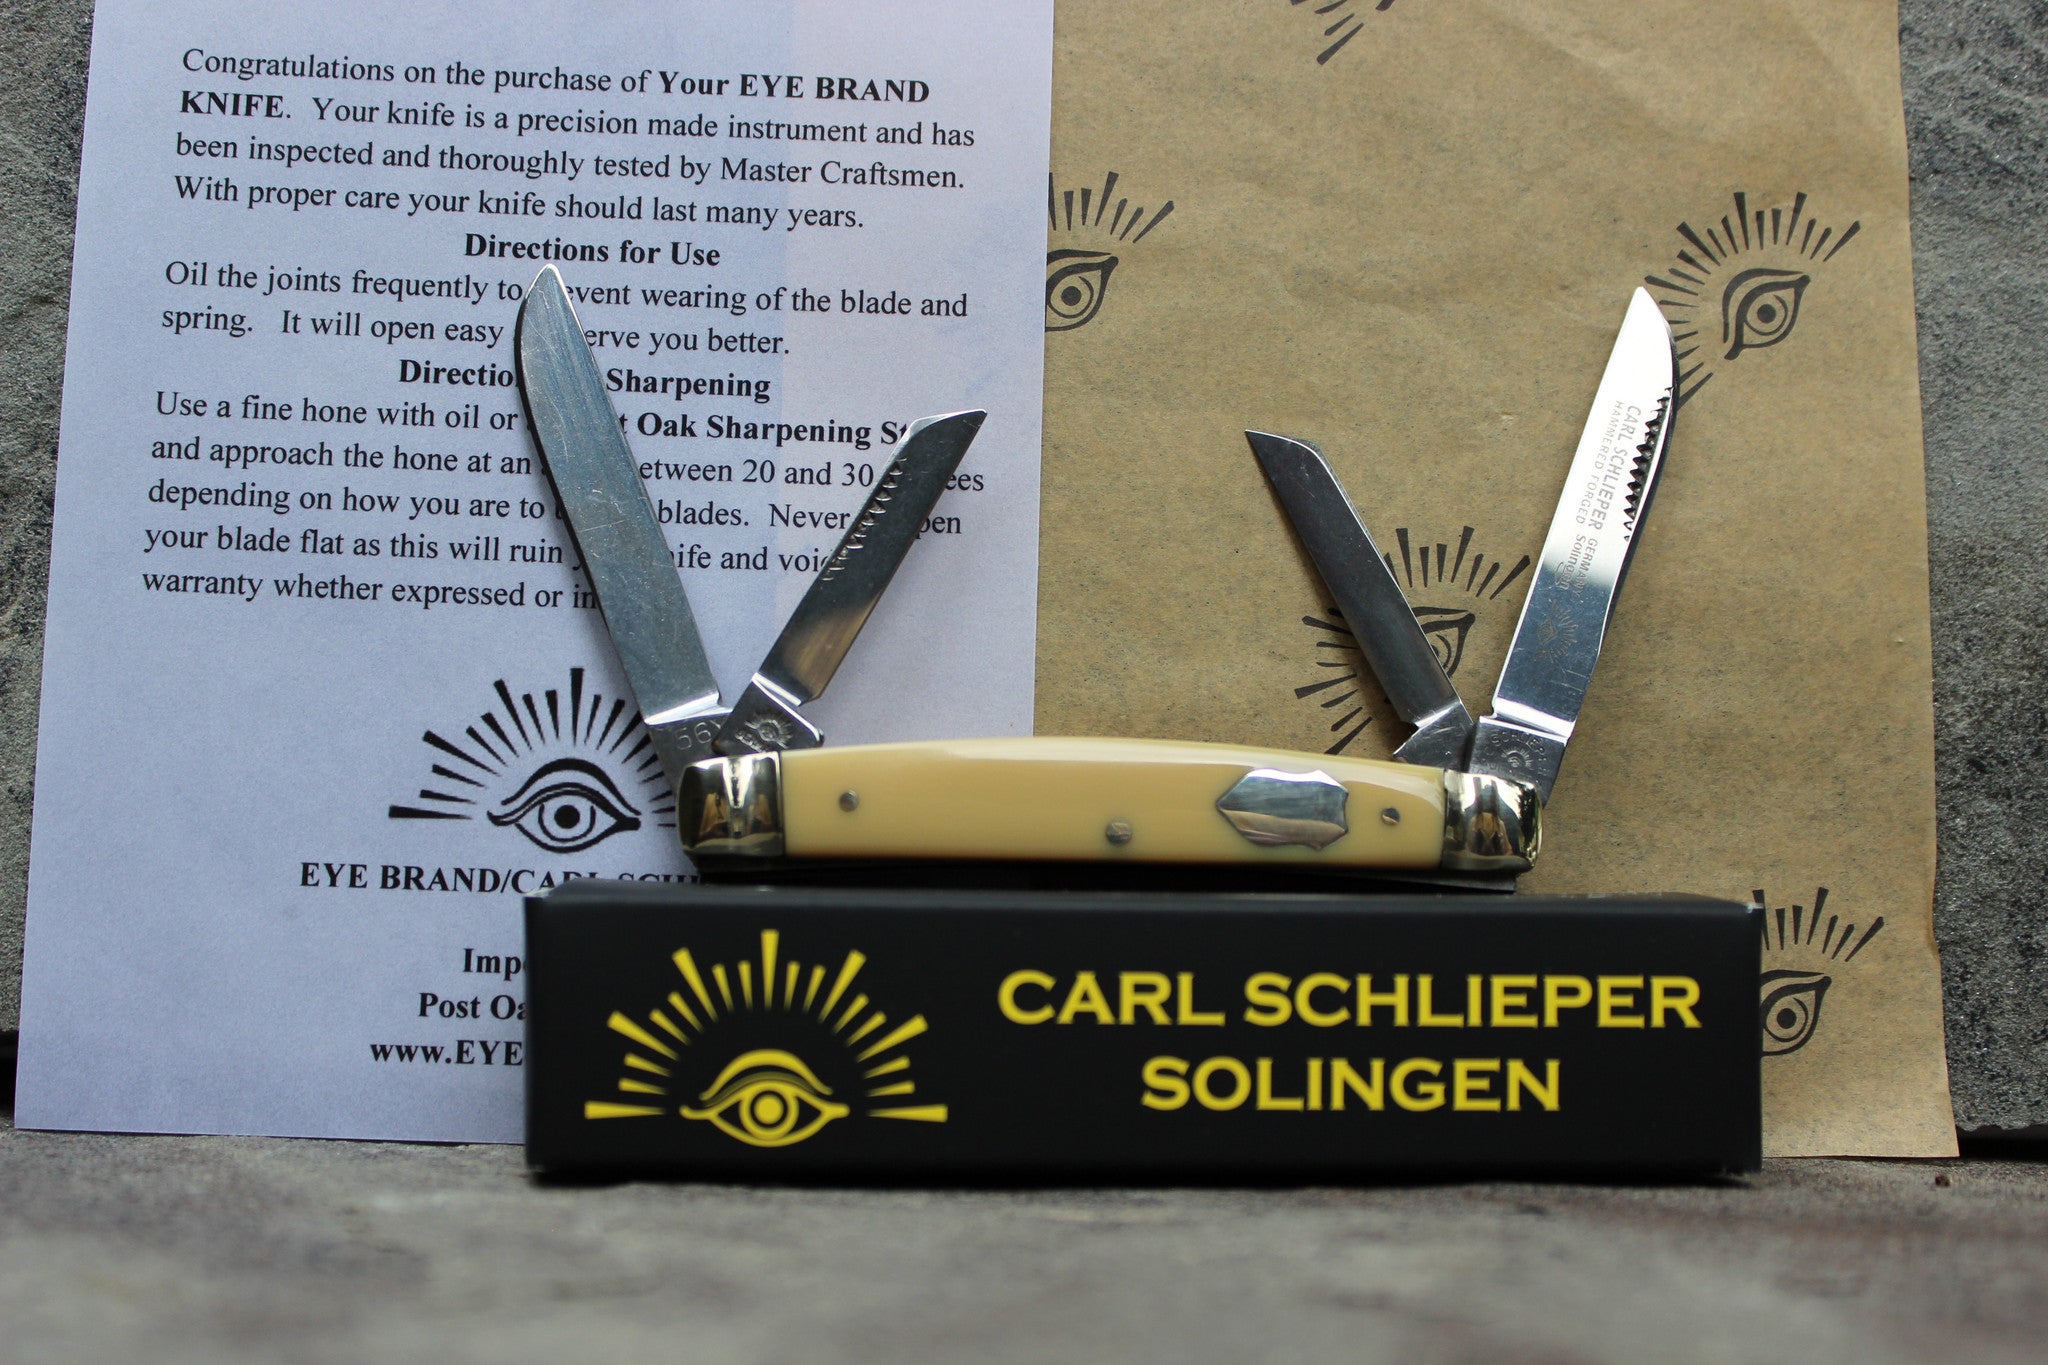 Eye Brand Baby Congress Knife - Hammer Forged Solingen Carbon Steel Blades  - Yellow Composition Handle - German Made